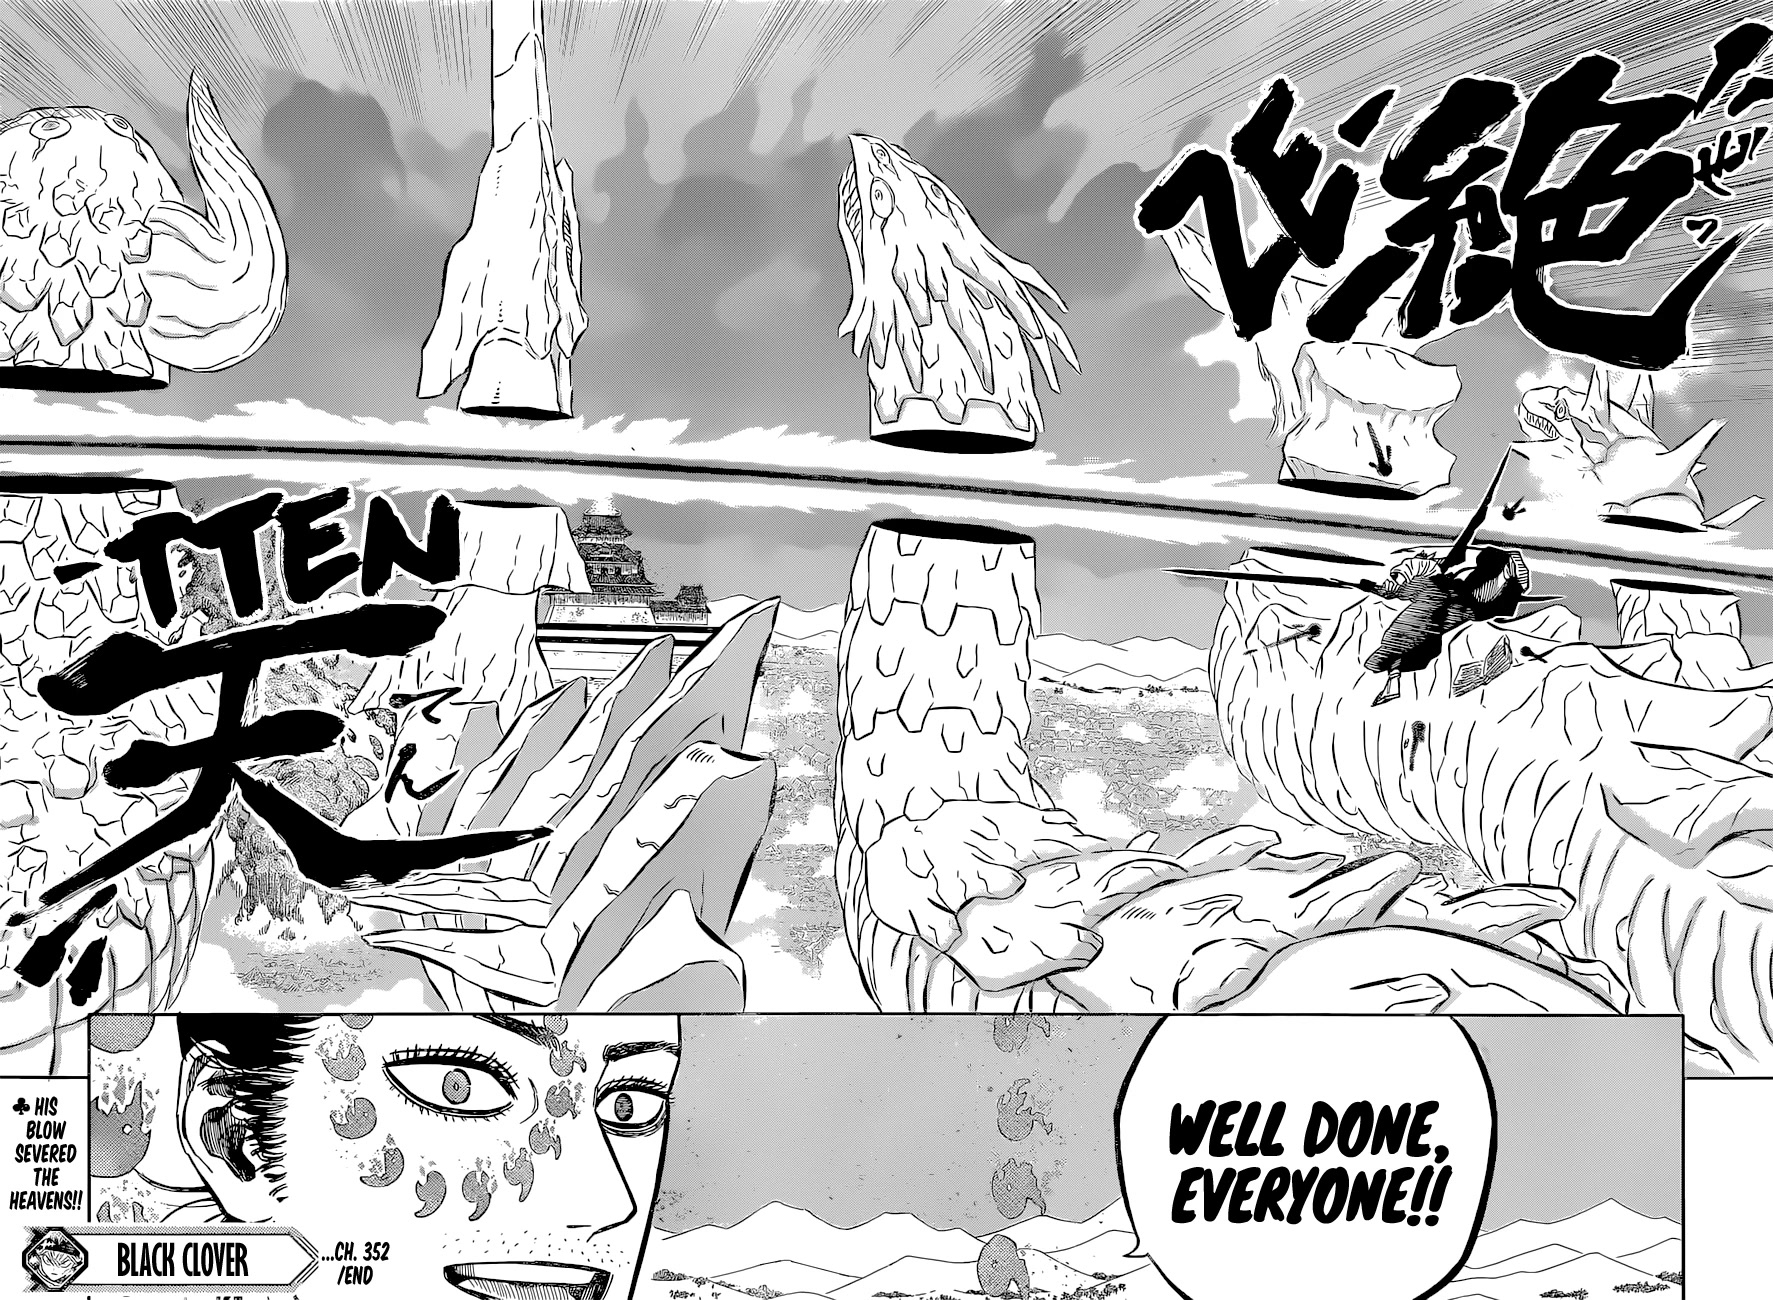 Black Clover, Chapter 352 Well Done image 8